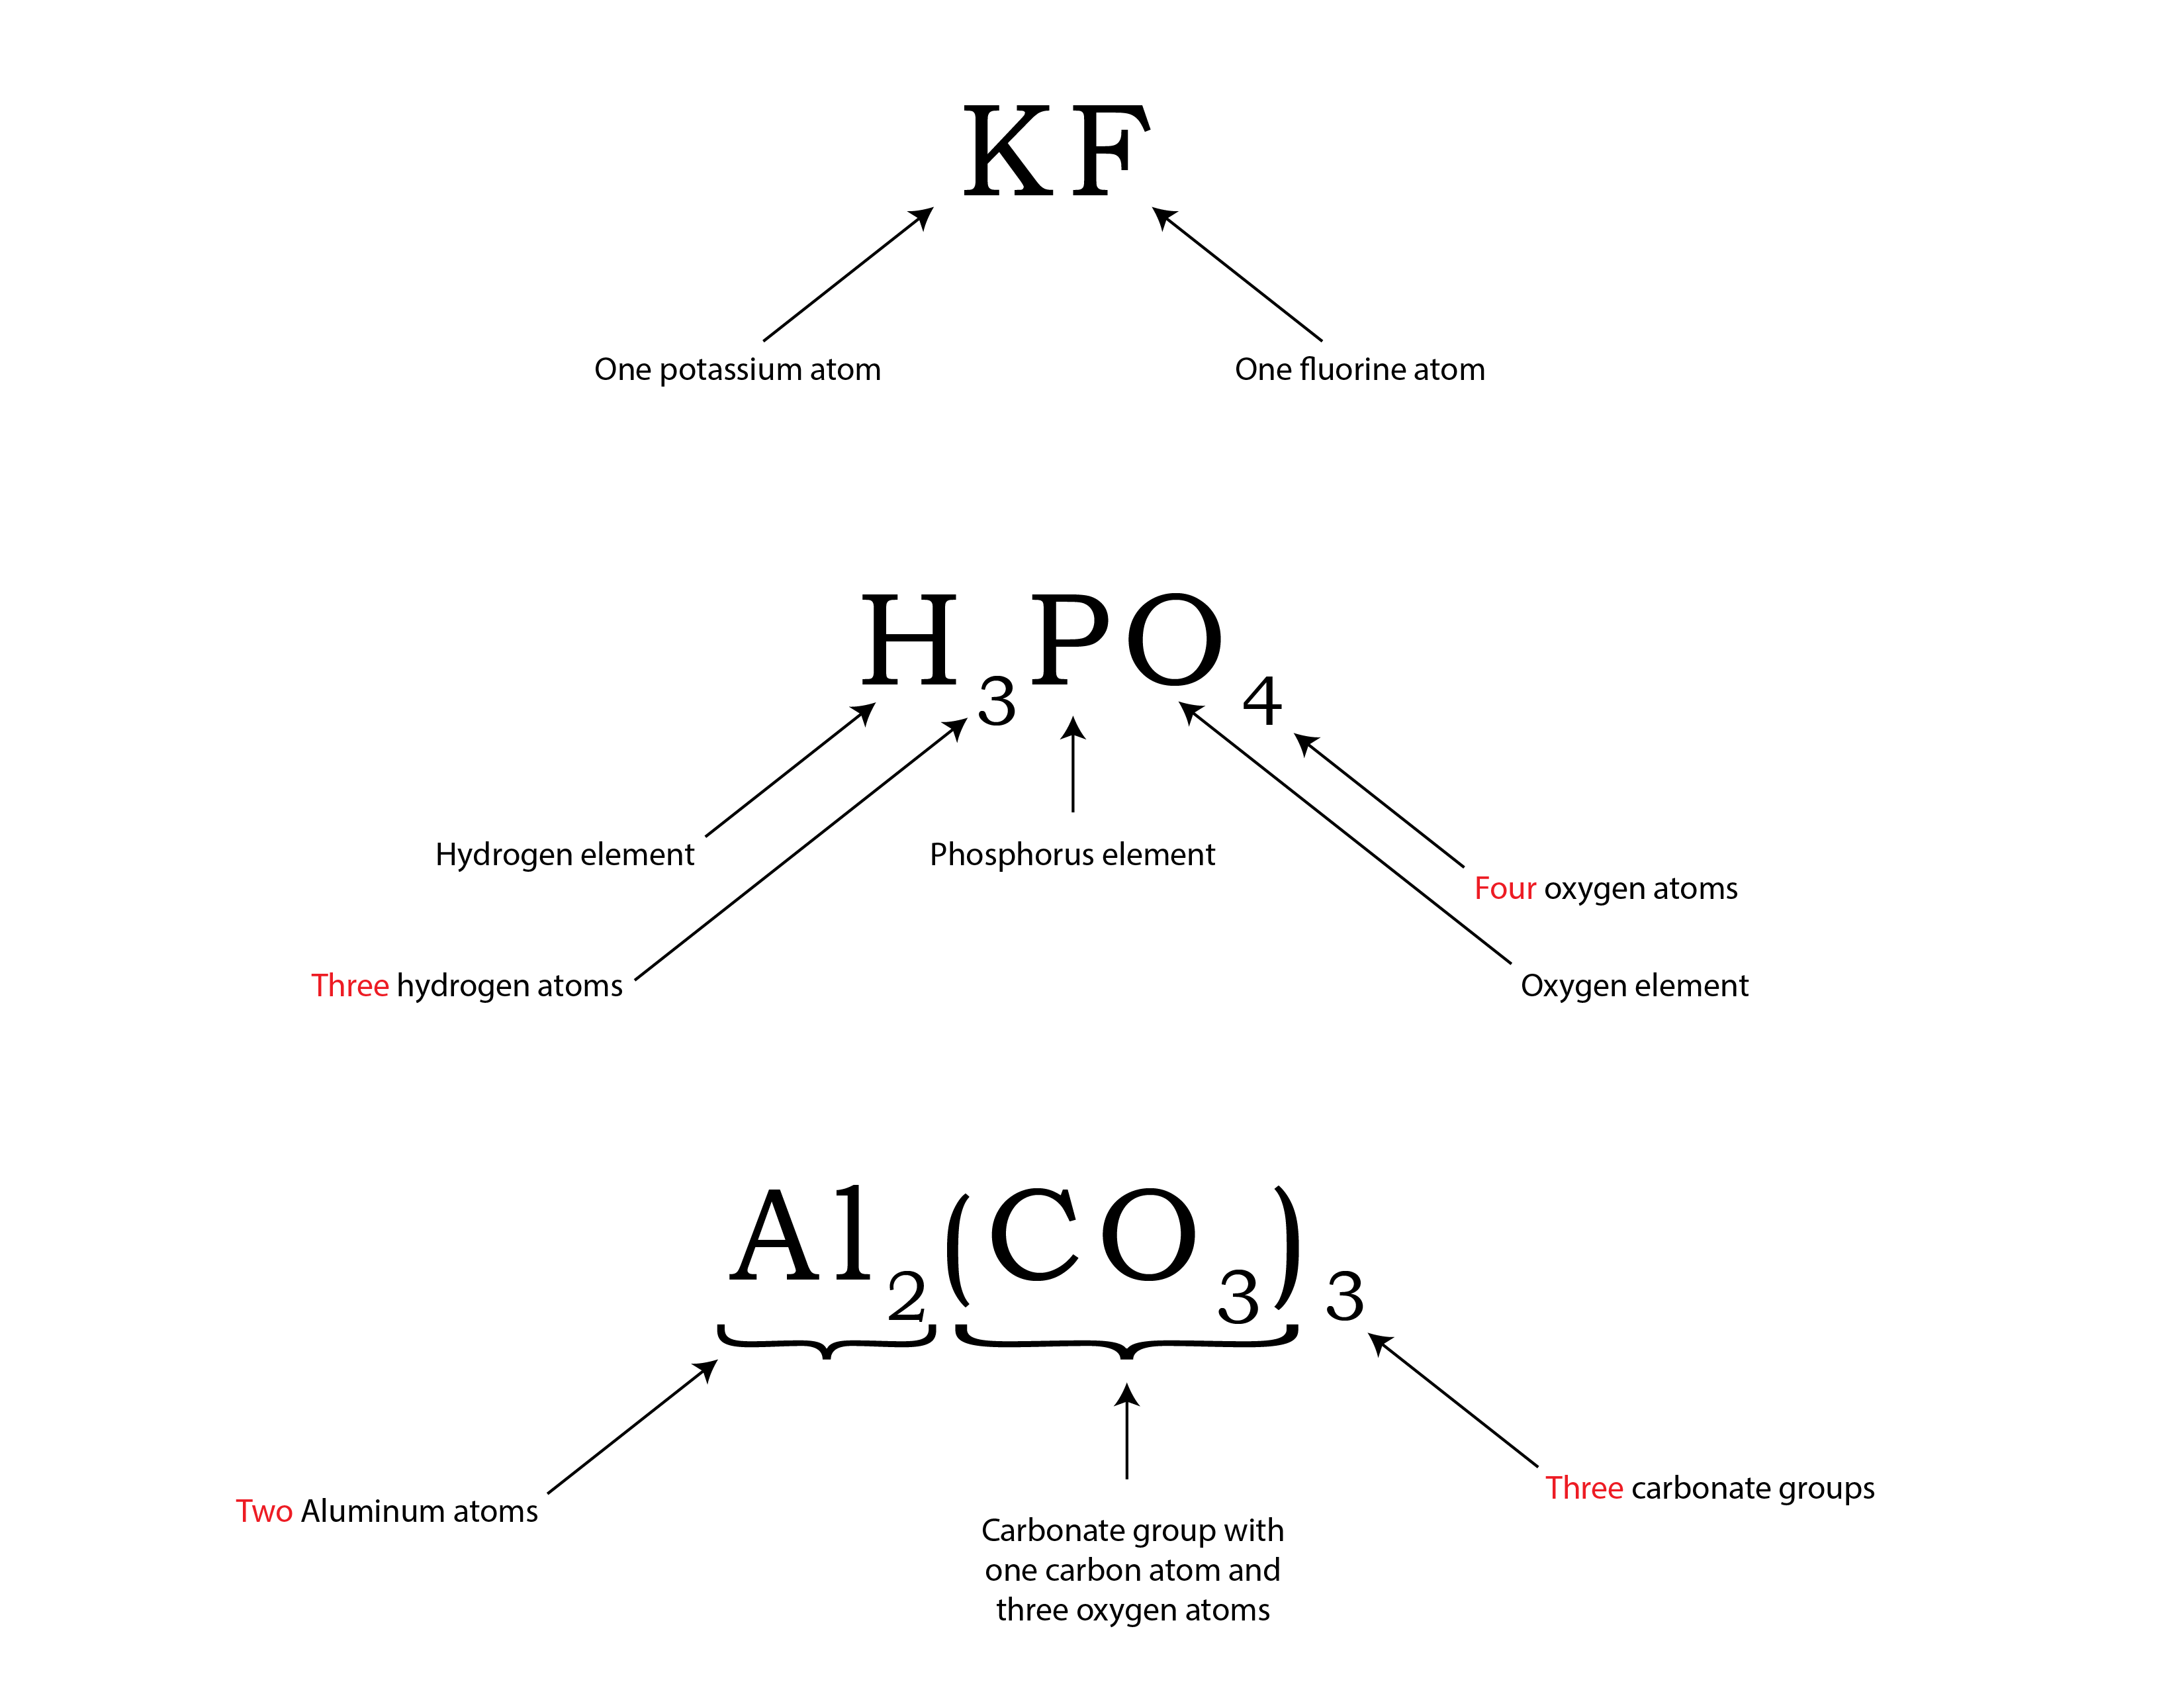 There are three chemical formulas stacked in a vertical line. At the top it represents K F. The two elements potassium, symbol K, and fluorine, symbol F combined to form K F. K F represents one potassium atom and one fluorine atom. The middle chemical formula is H subscript 3 P O subscript 4. For this compound, there are three hydrogen, symbol H, atoms, one phosphorous, symbol P, atom and four oxygen, symbol O atoms. At the bottom is A l subscript 2 ( C O subscript 3 ) subscript 3. For this compound, there are two aluminum atoms, three carbon atoms and nine oxygen atoms.